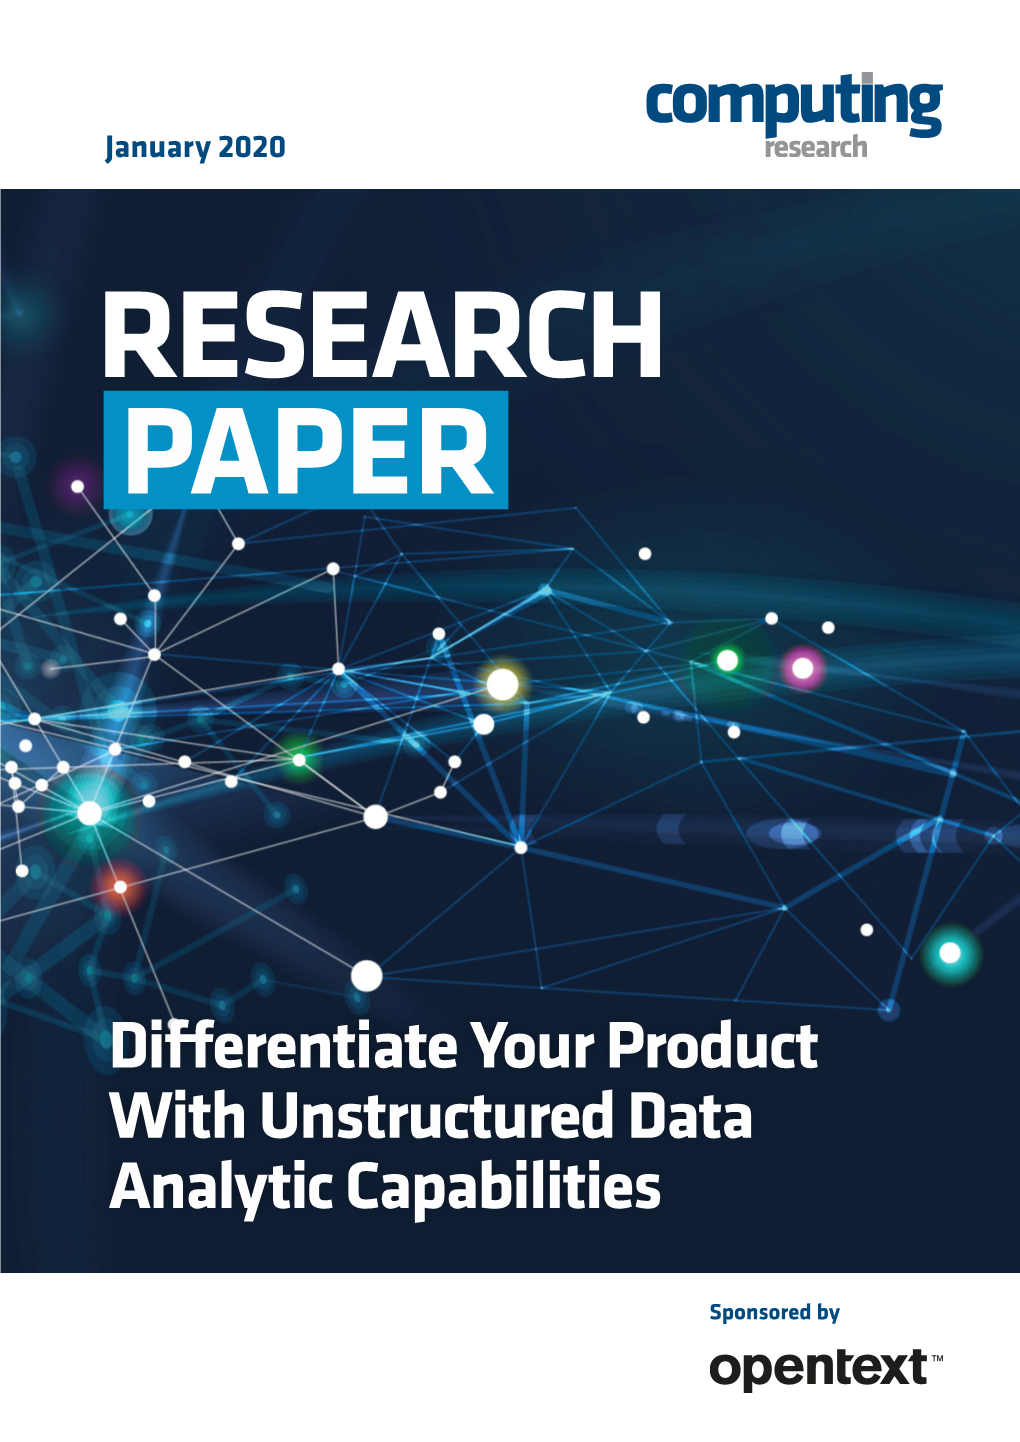 Research Paper | Differentiate Your Product with Unstructured Data Analytic Capabilities